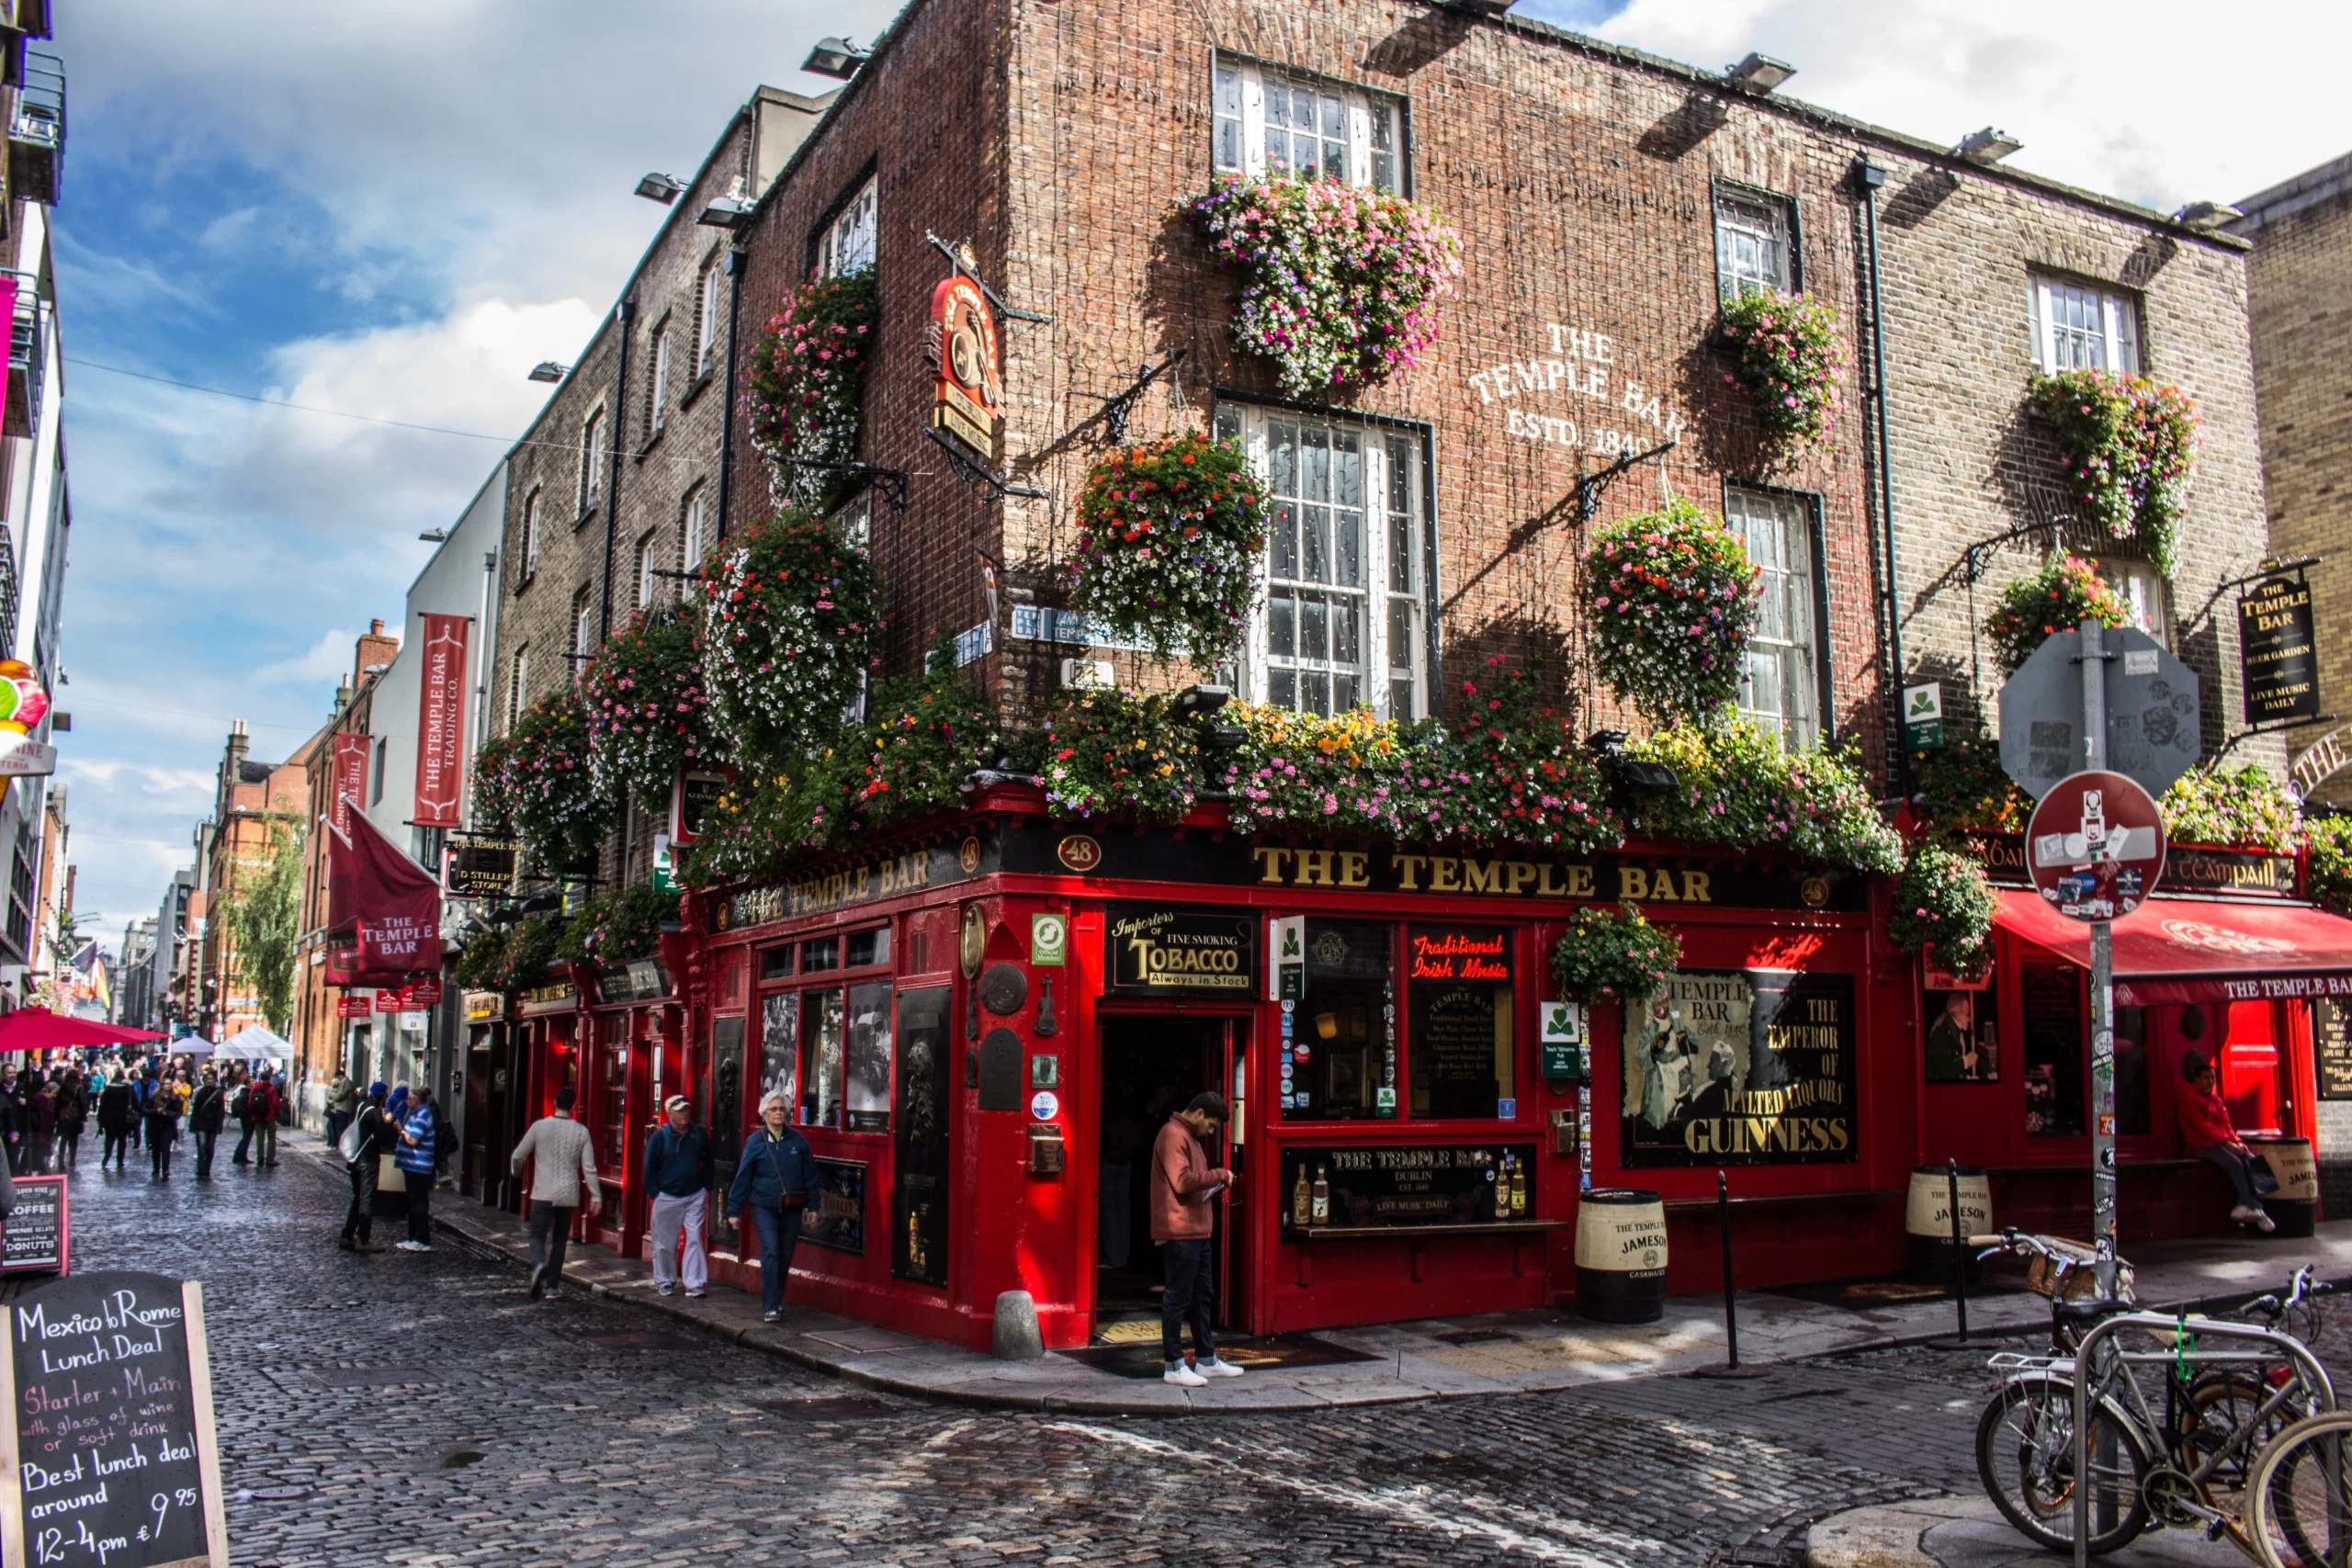 The Temple Bar, Temple Bar, Dublin 2, Irlanda Published on November 21, 2020 Canon, EOS 600D Free to use under the Unsplash License